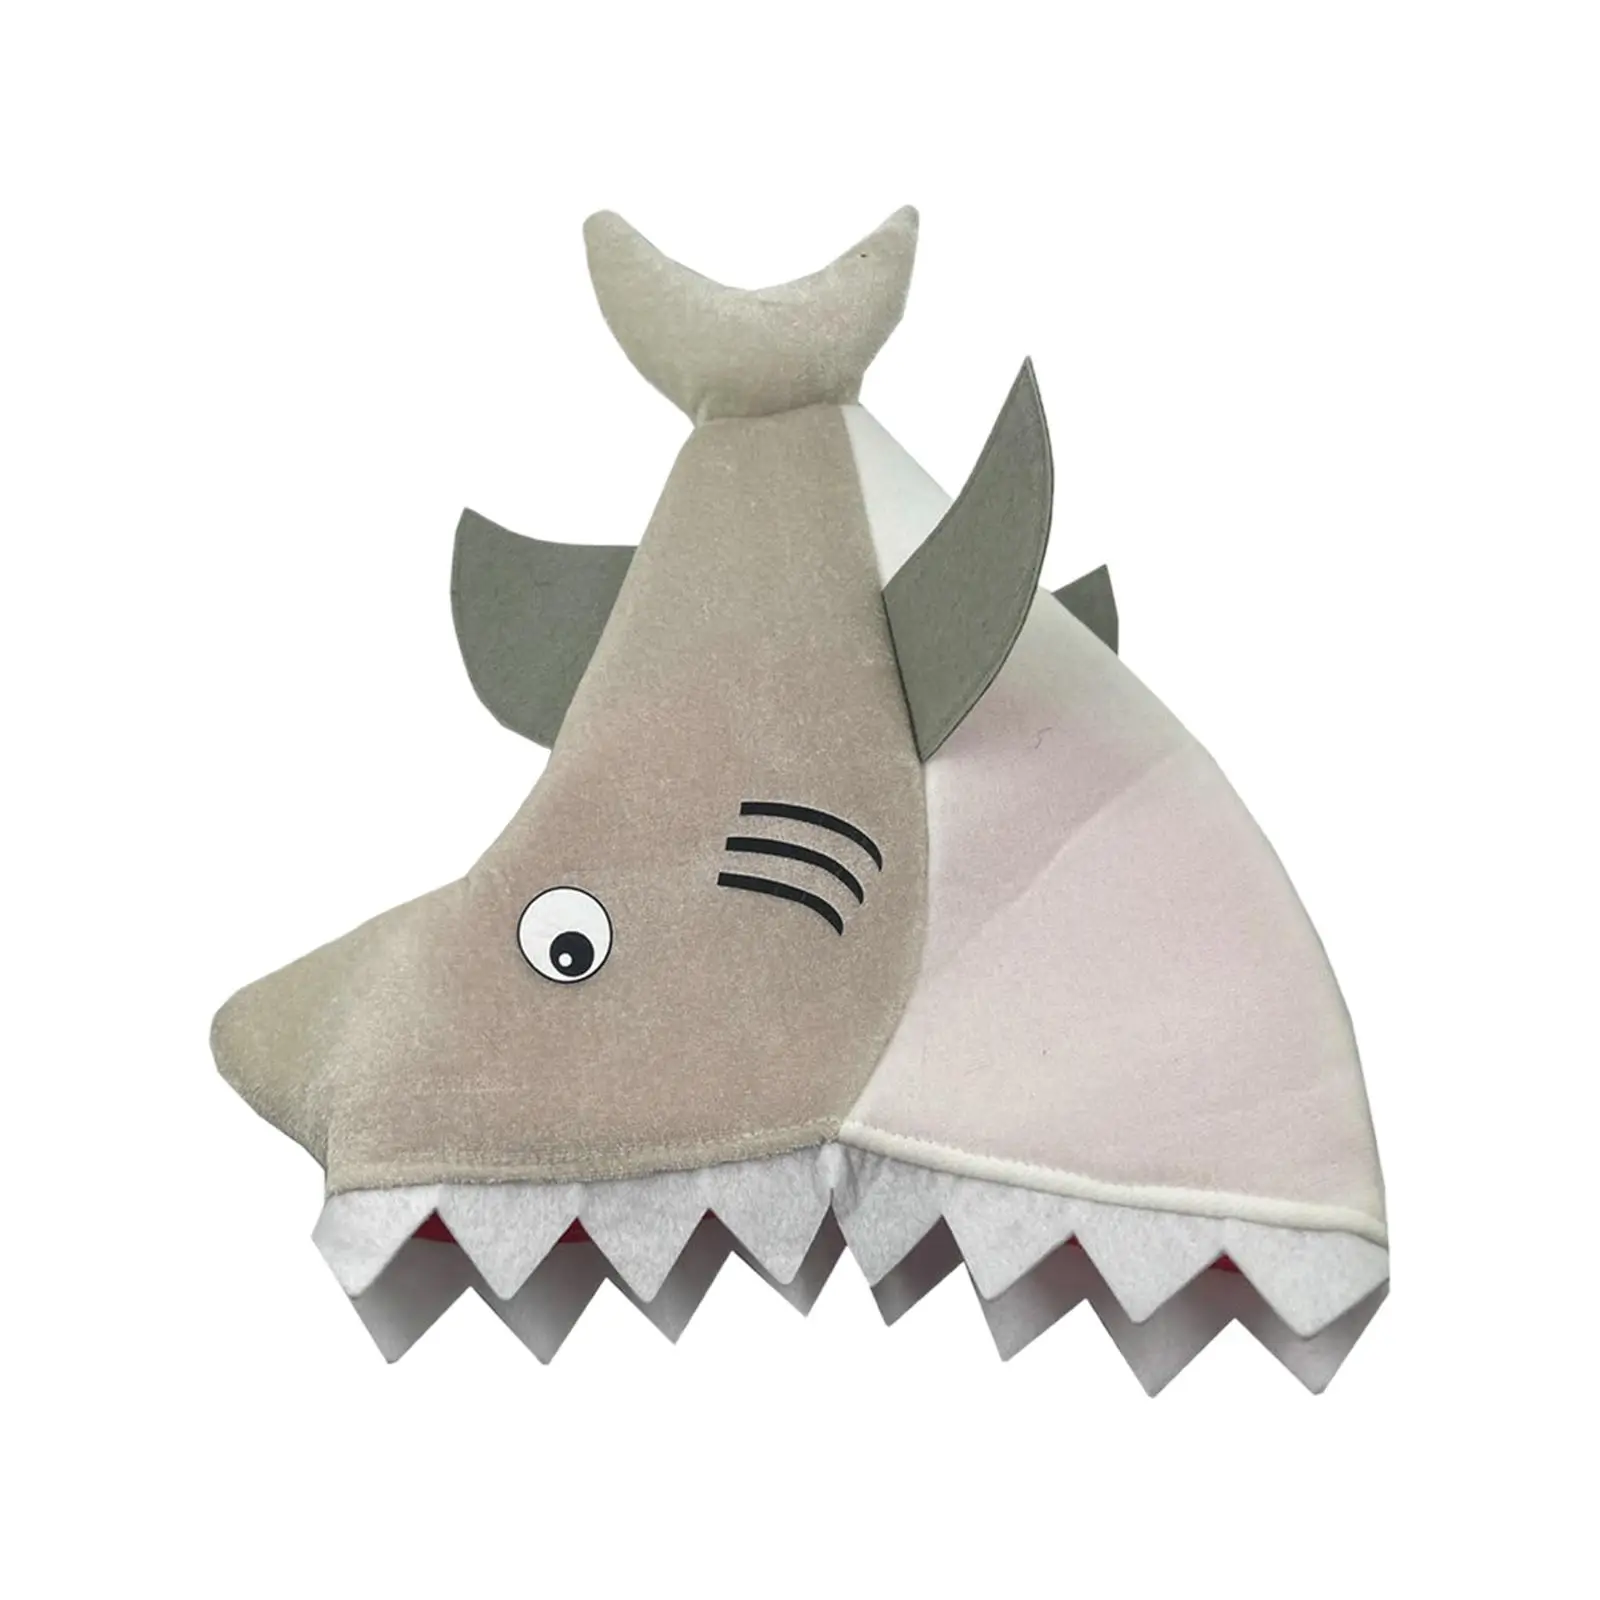 Funny Plush Animal Hat Costume Hats Cosplay Headwear for Stage Performance Dress up Hat